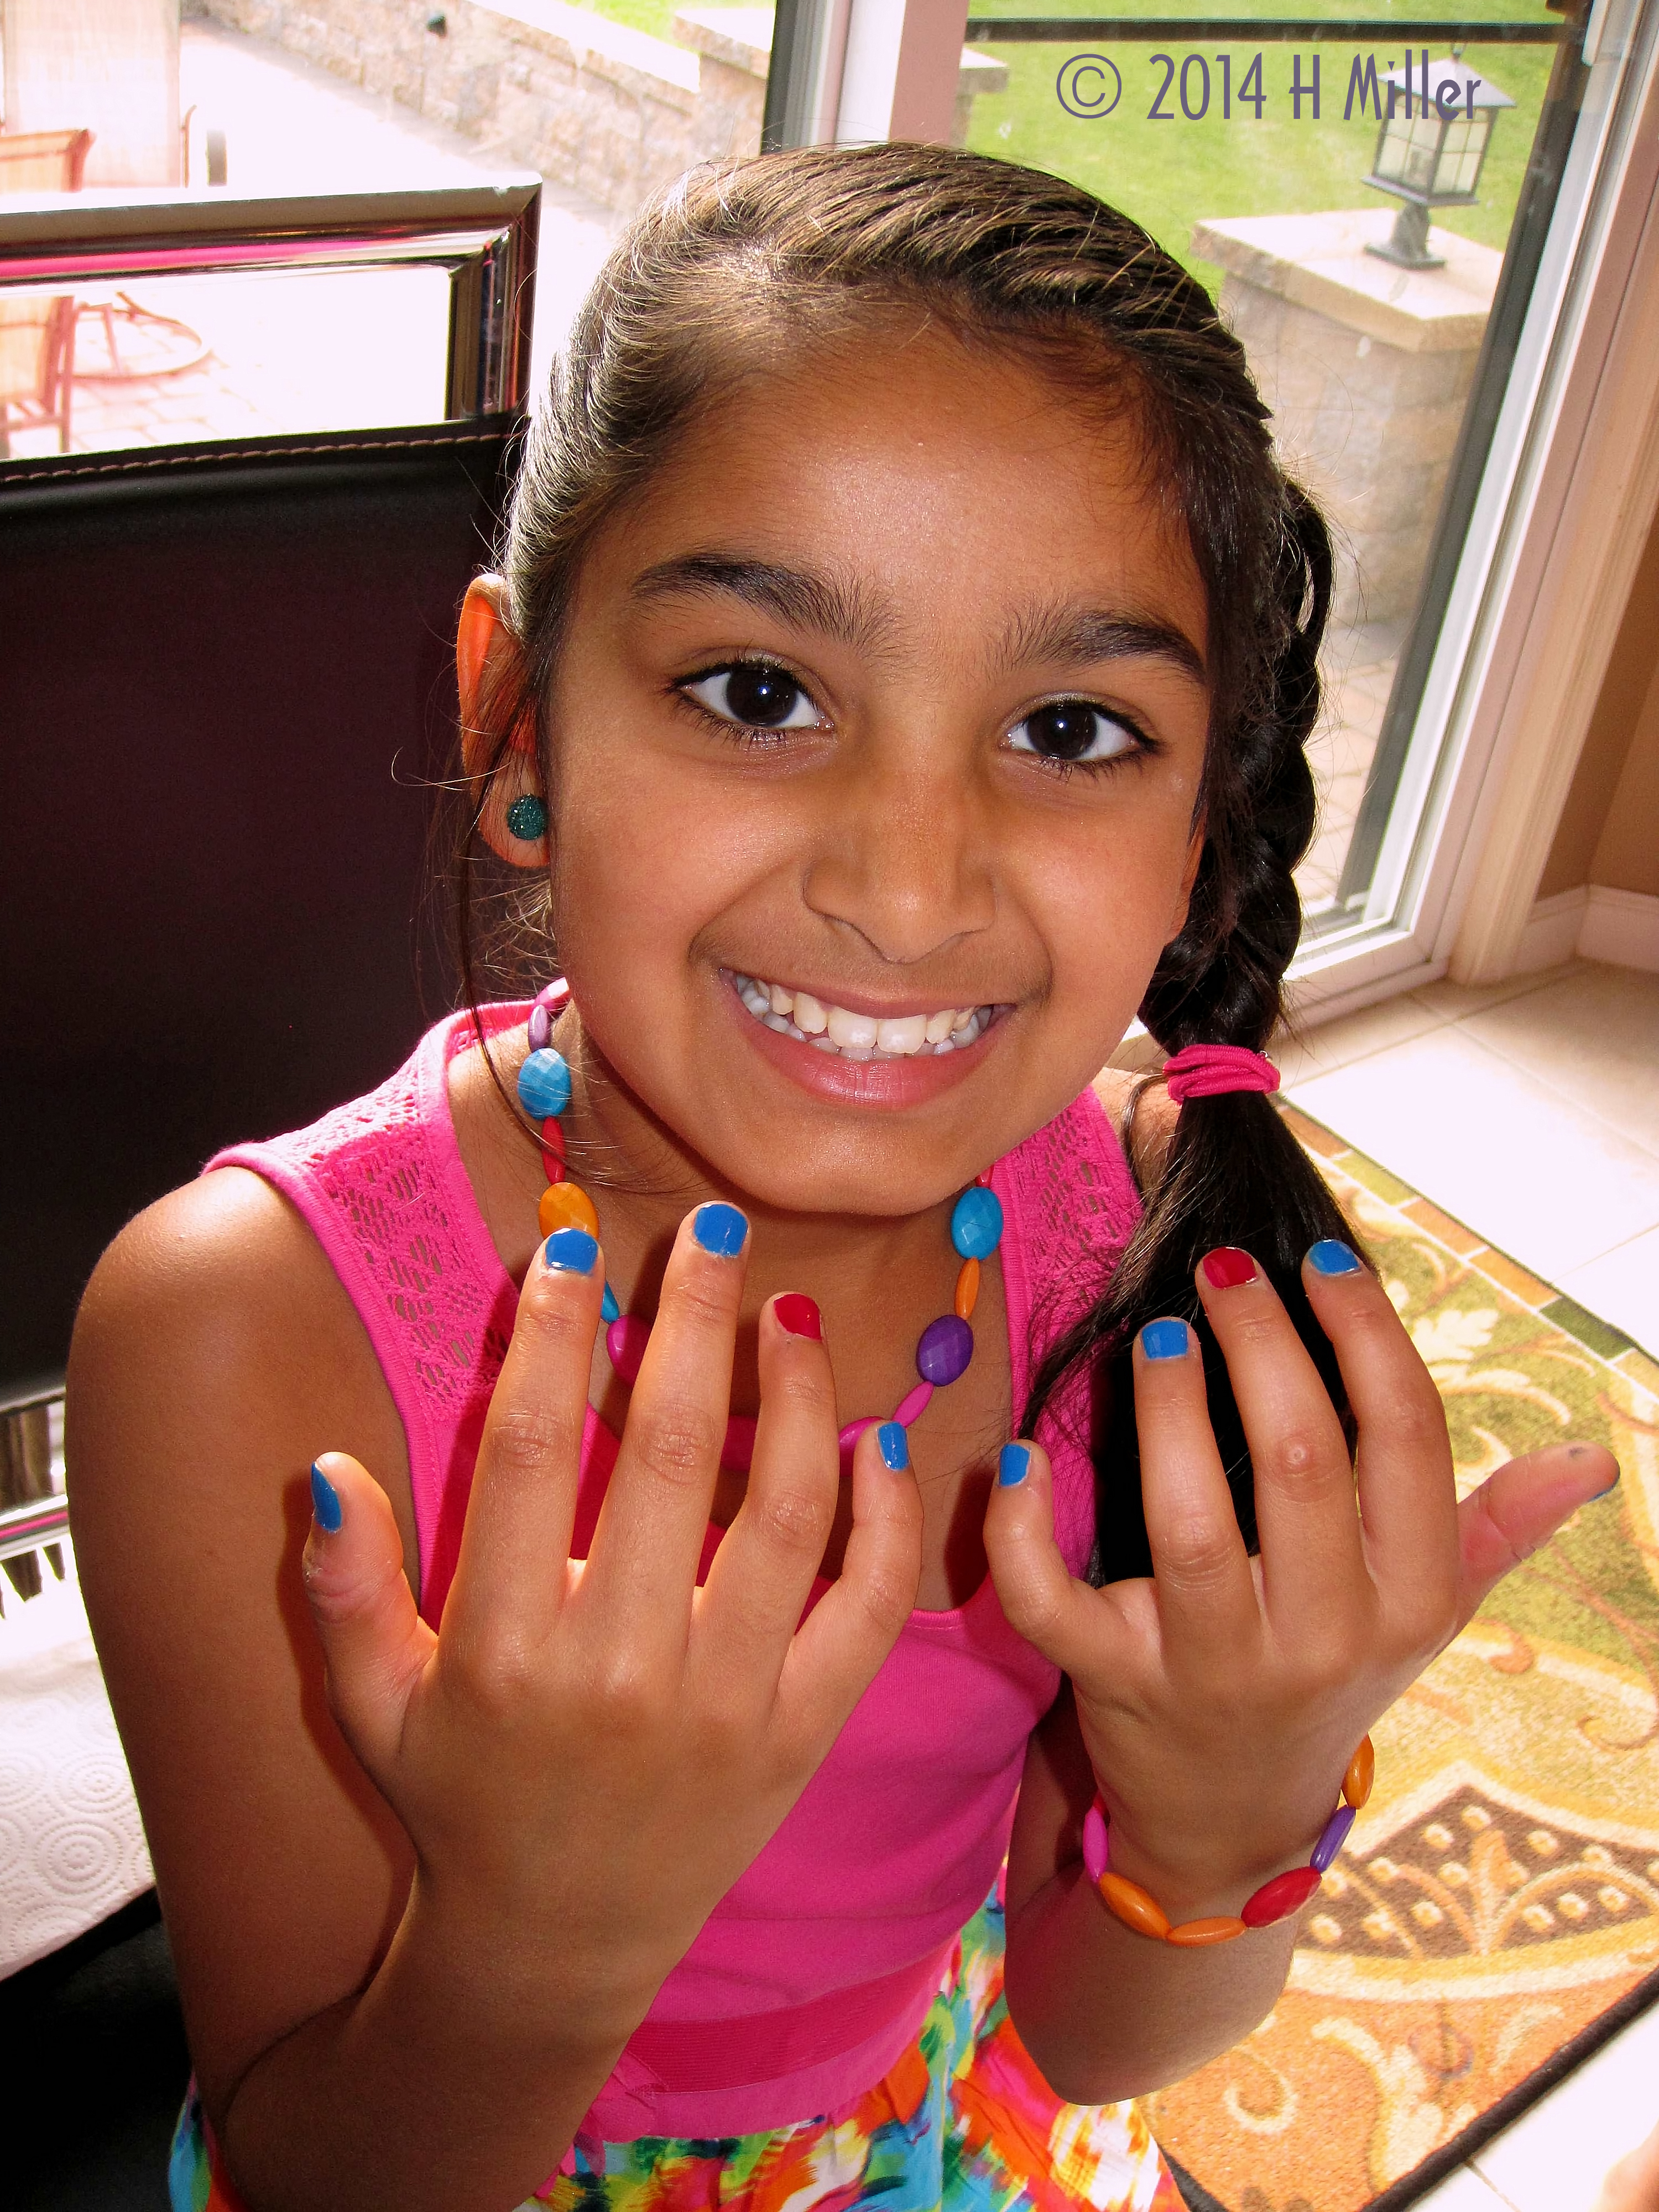 Kids Spa Mini Mani Nails Match Her Jewelry And Outfit! Nice! 